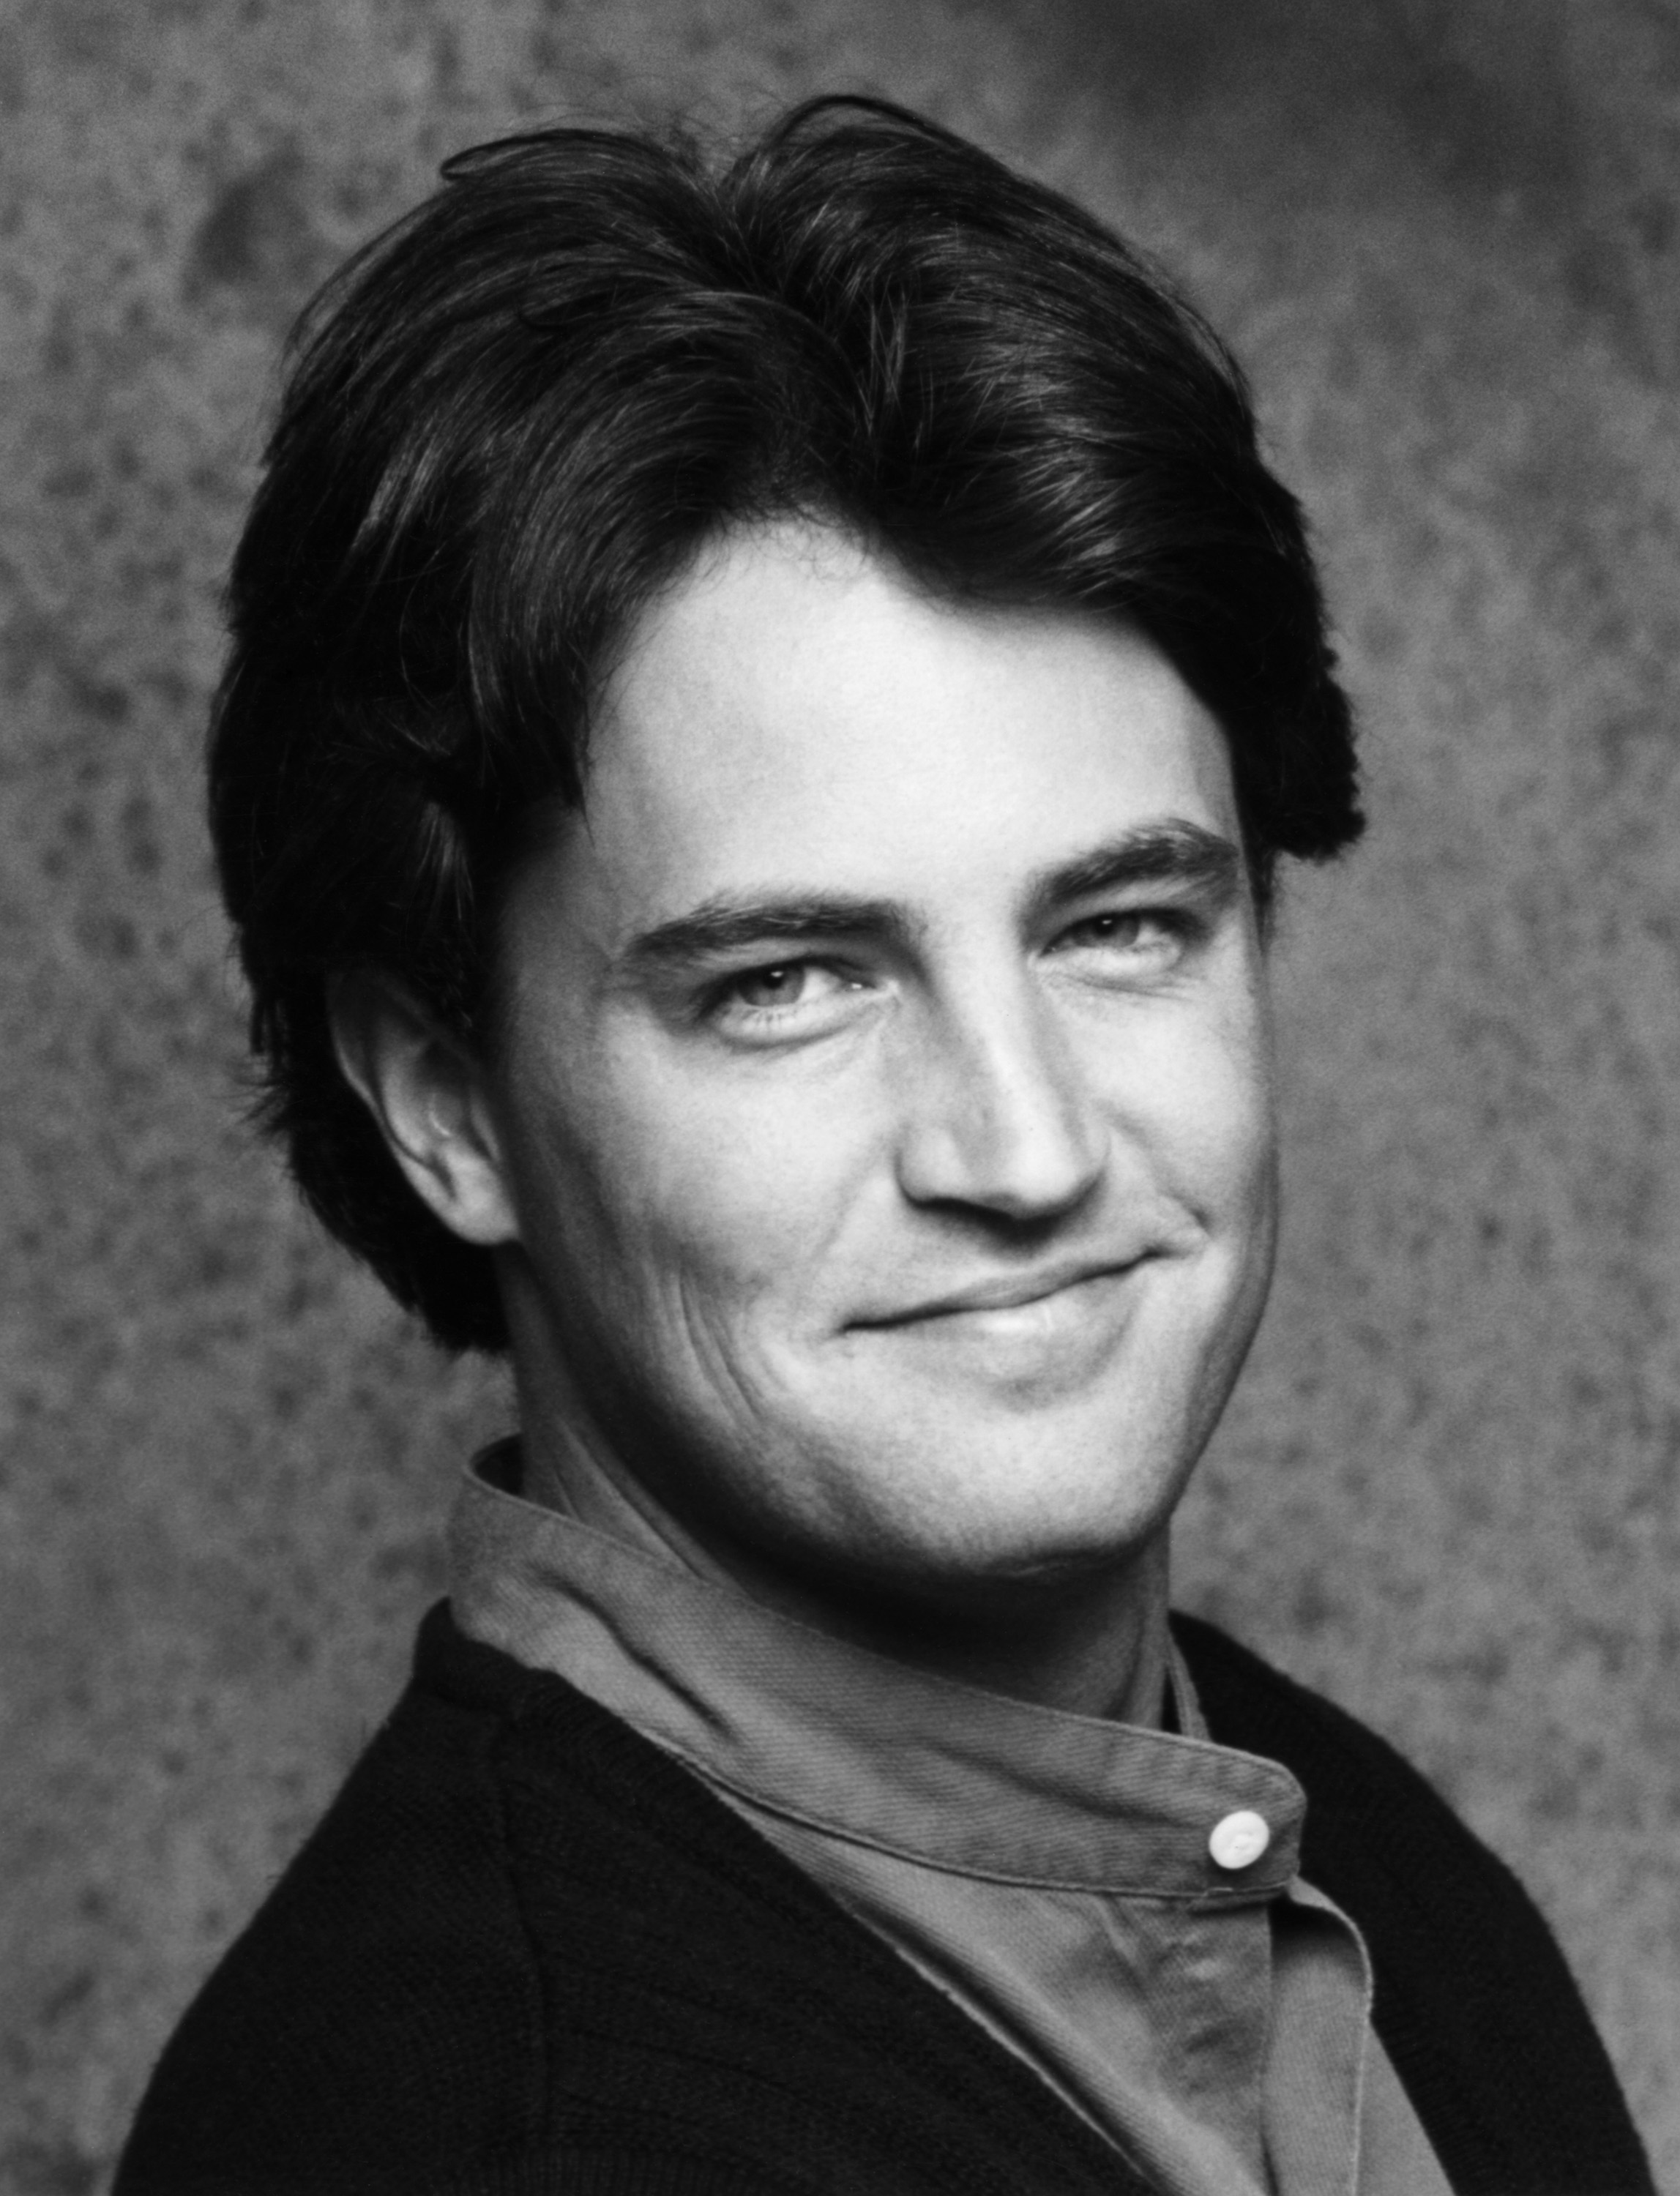 Matthew Perry on "Friends" in 1994 | Source: Getty Images